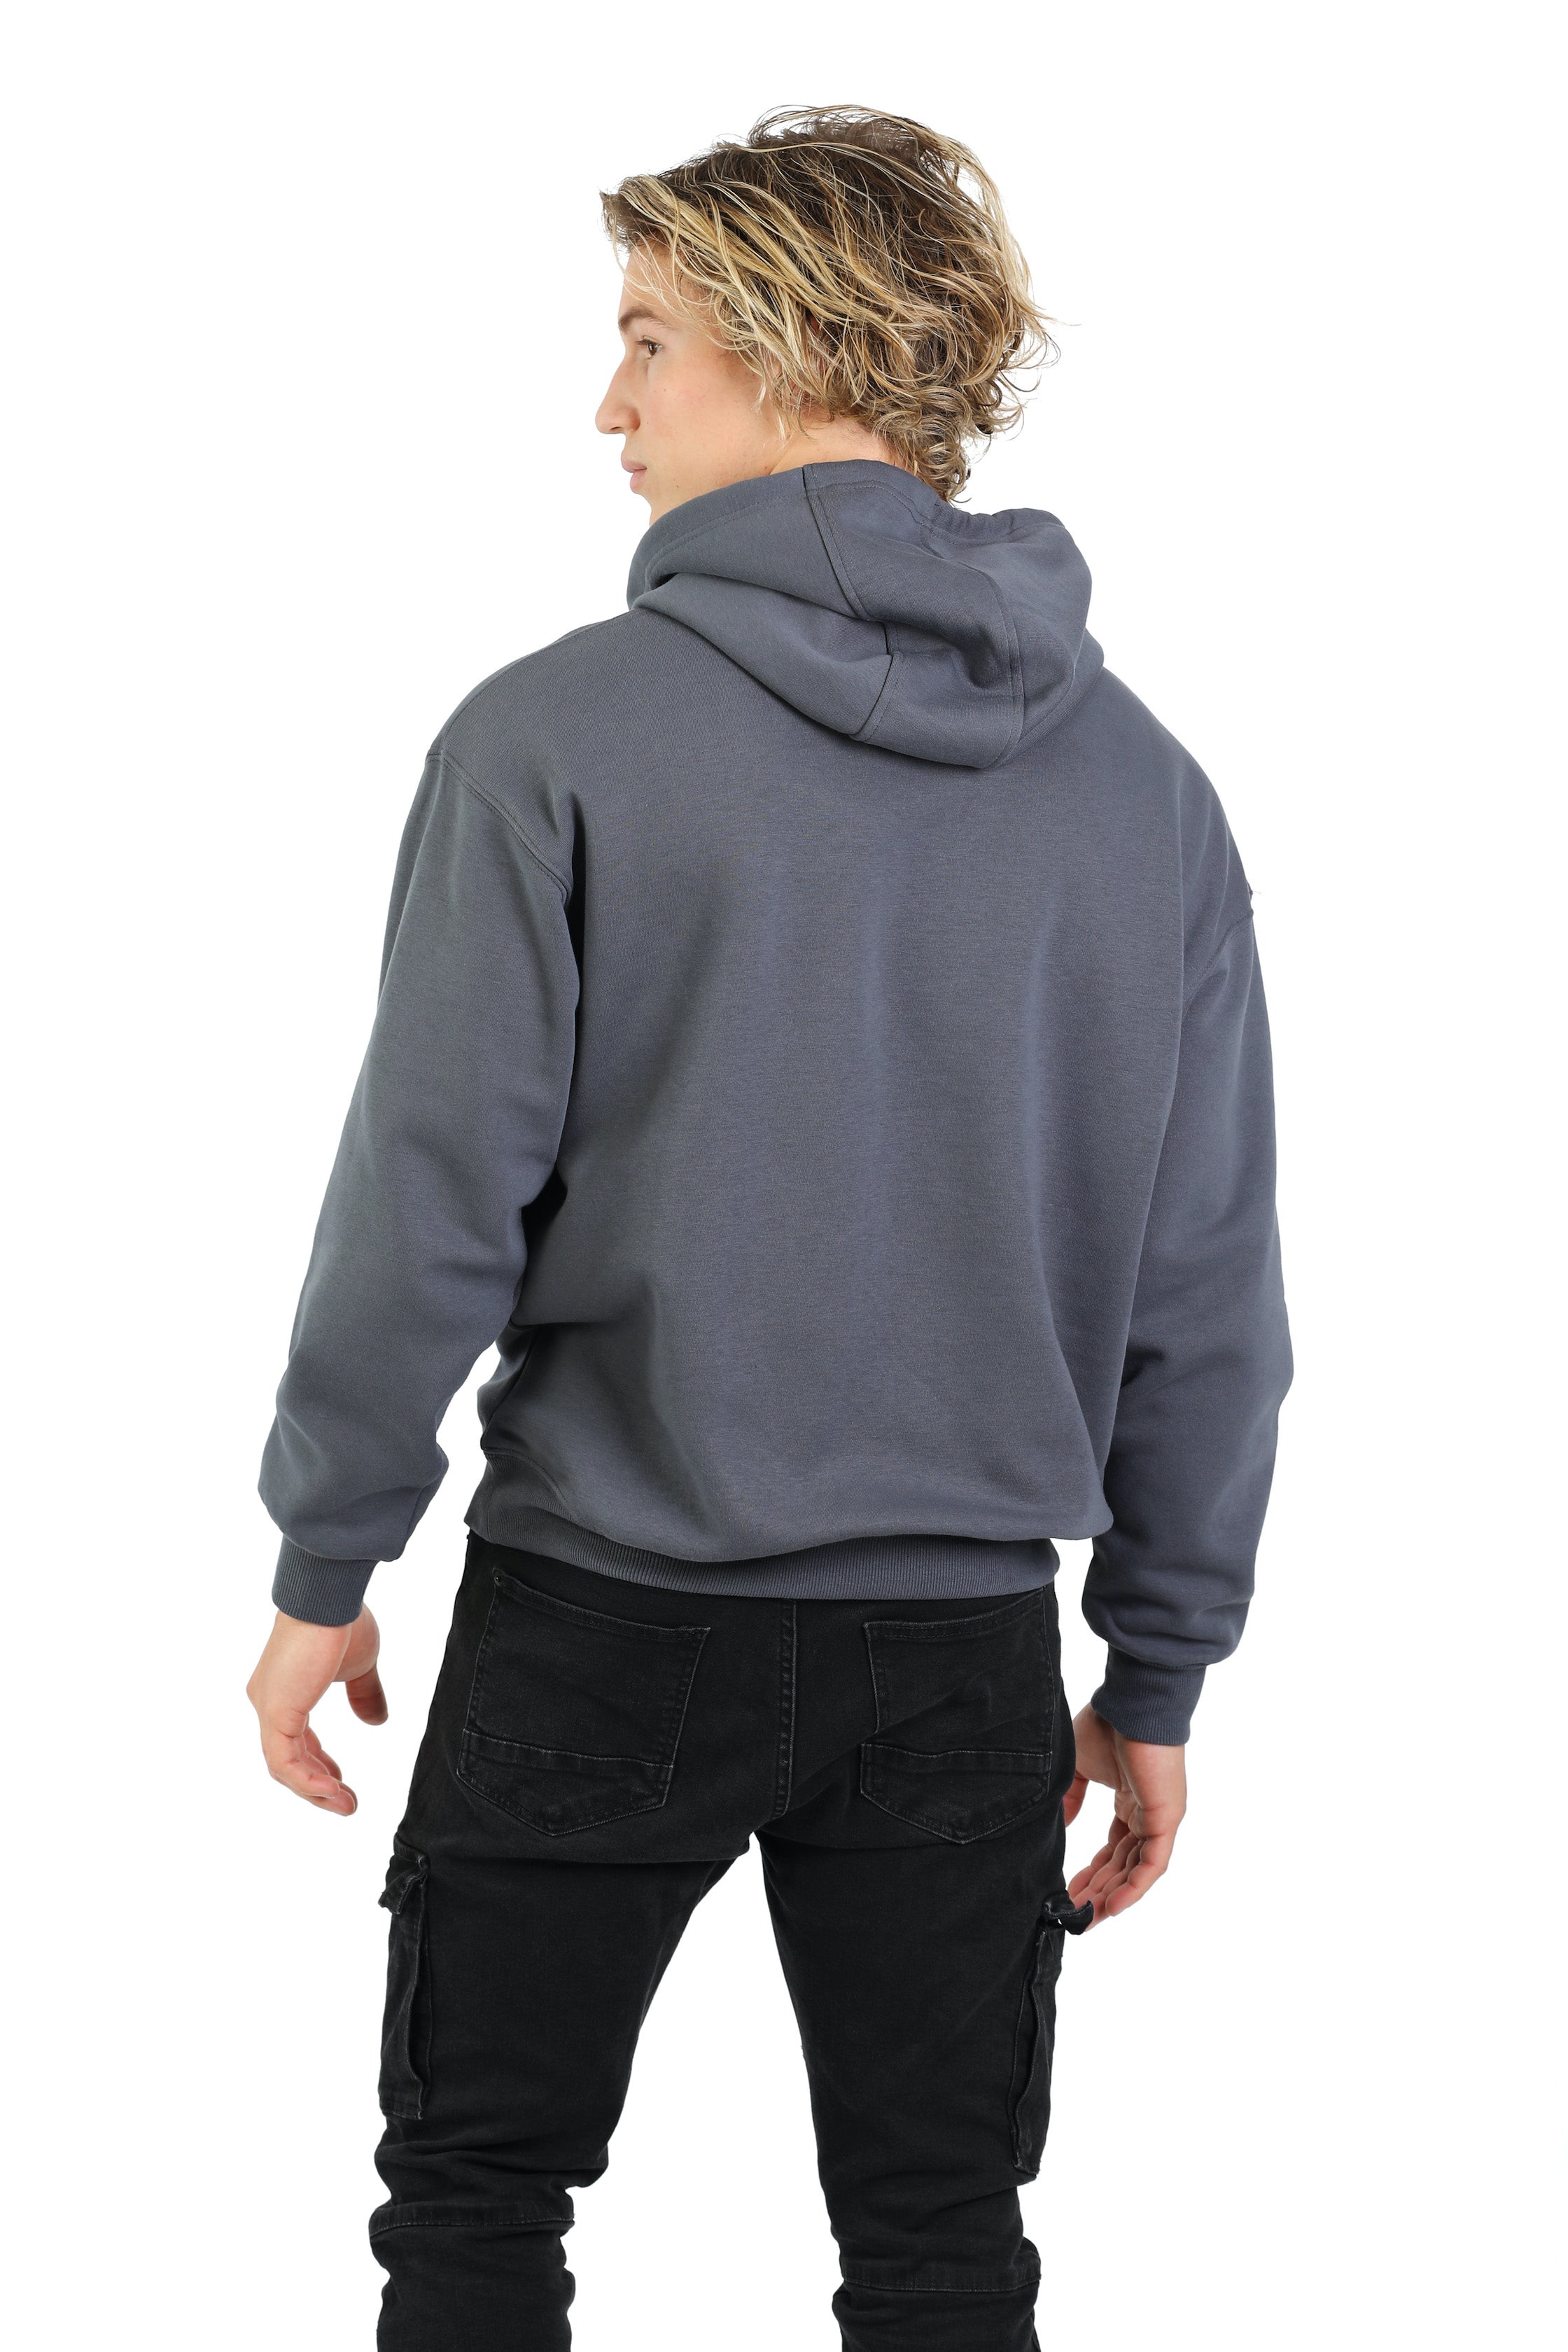 Cheeky relaxed hoodie in navy wash